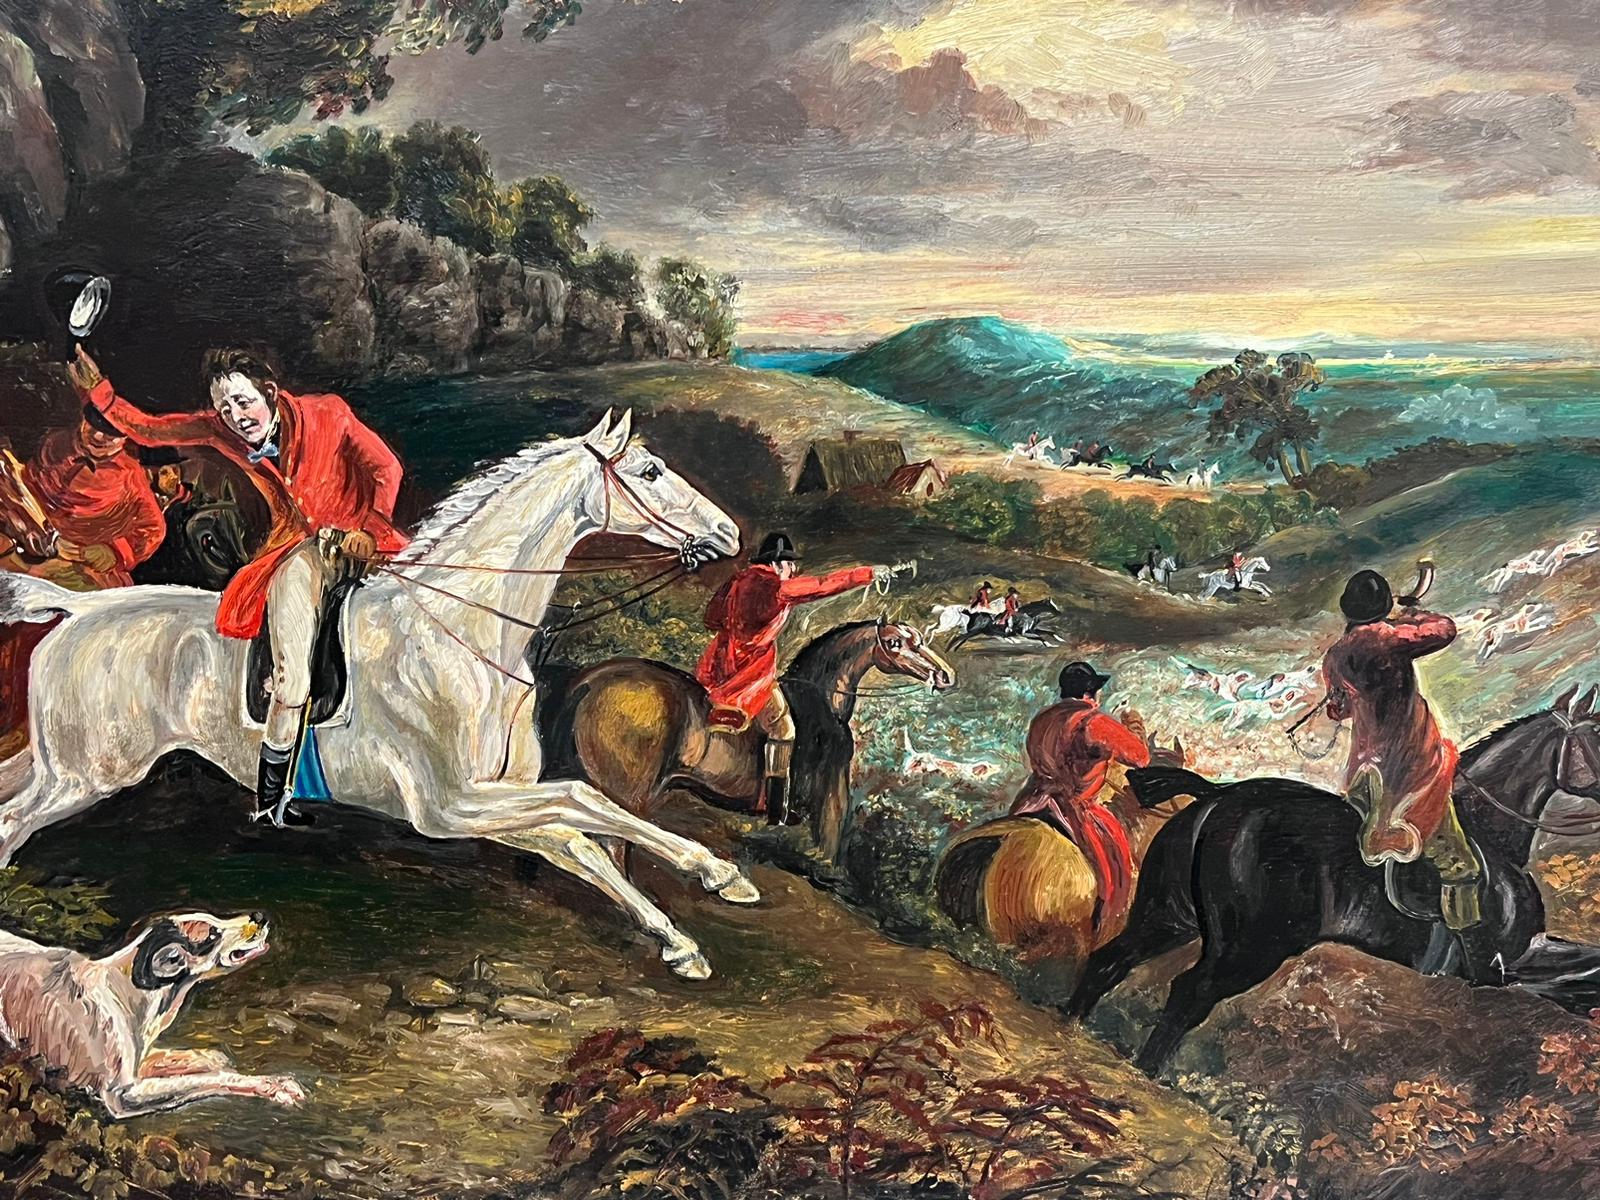 Classic English Fox Hunting Horses Riders & Hounds in Landscape, British Oil  - Victorian Painting by Michael Constable (20th Century British School)